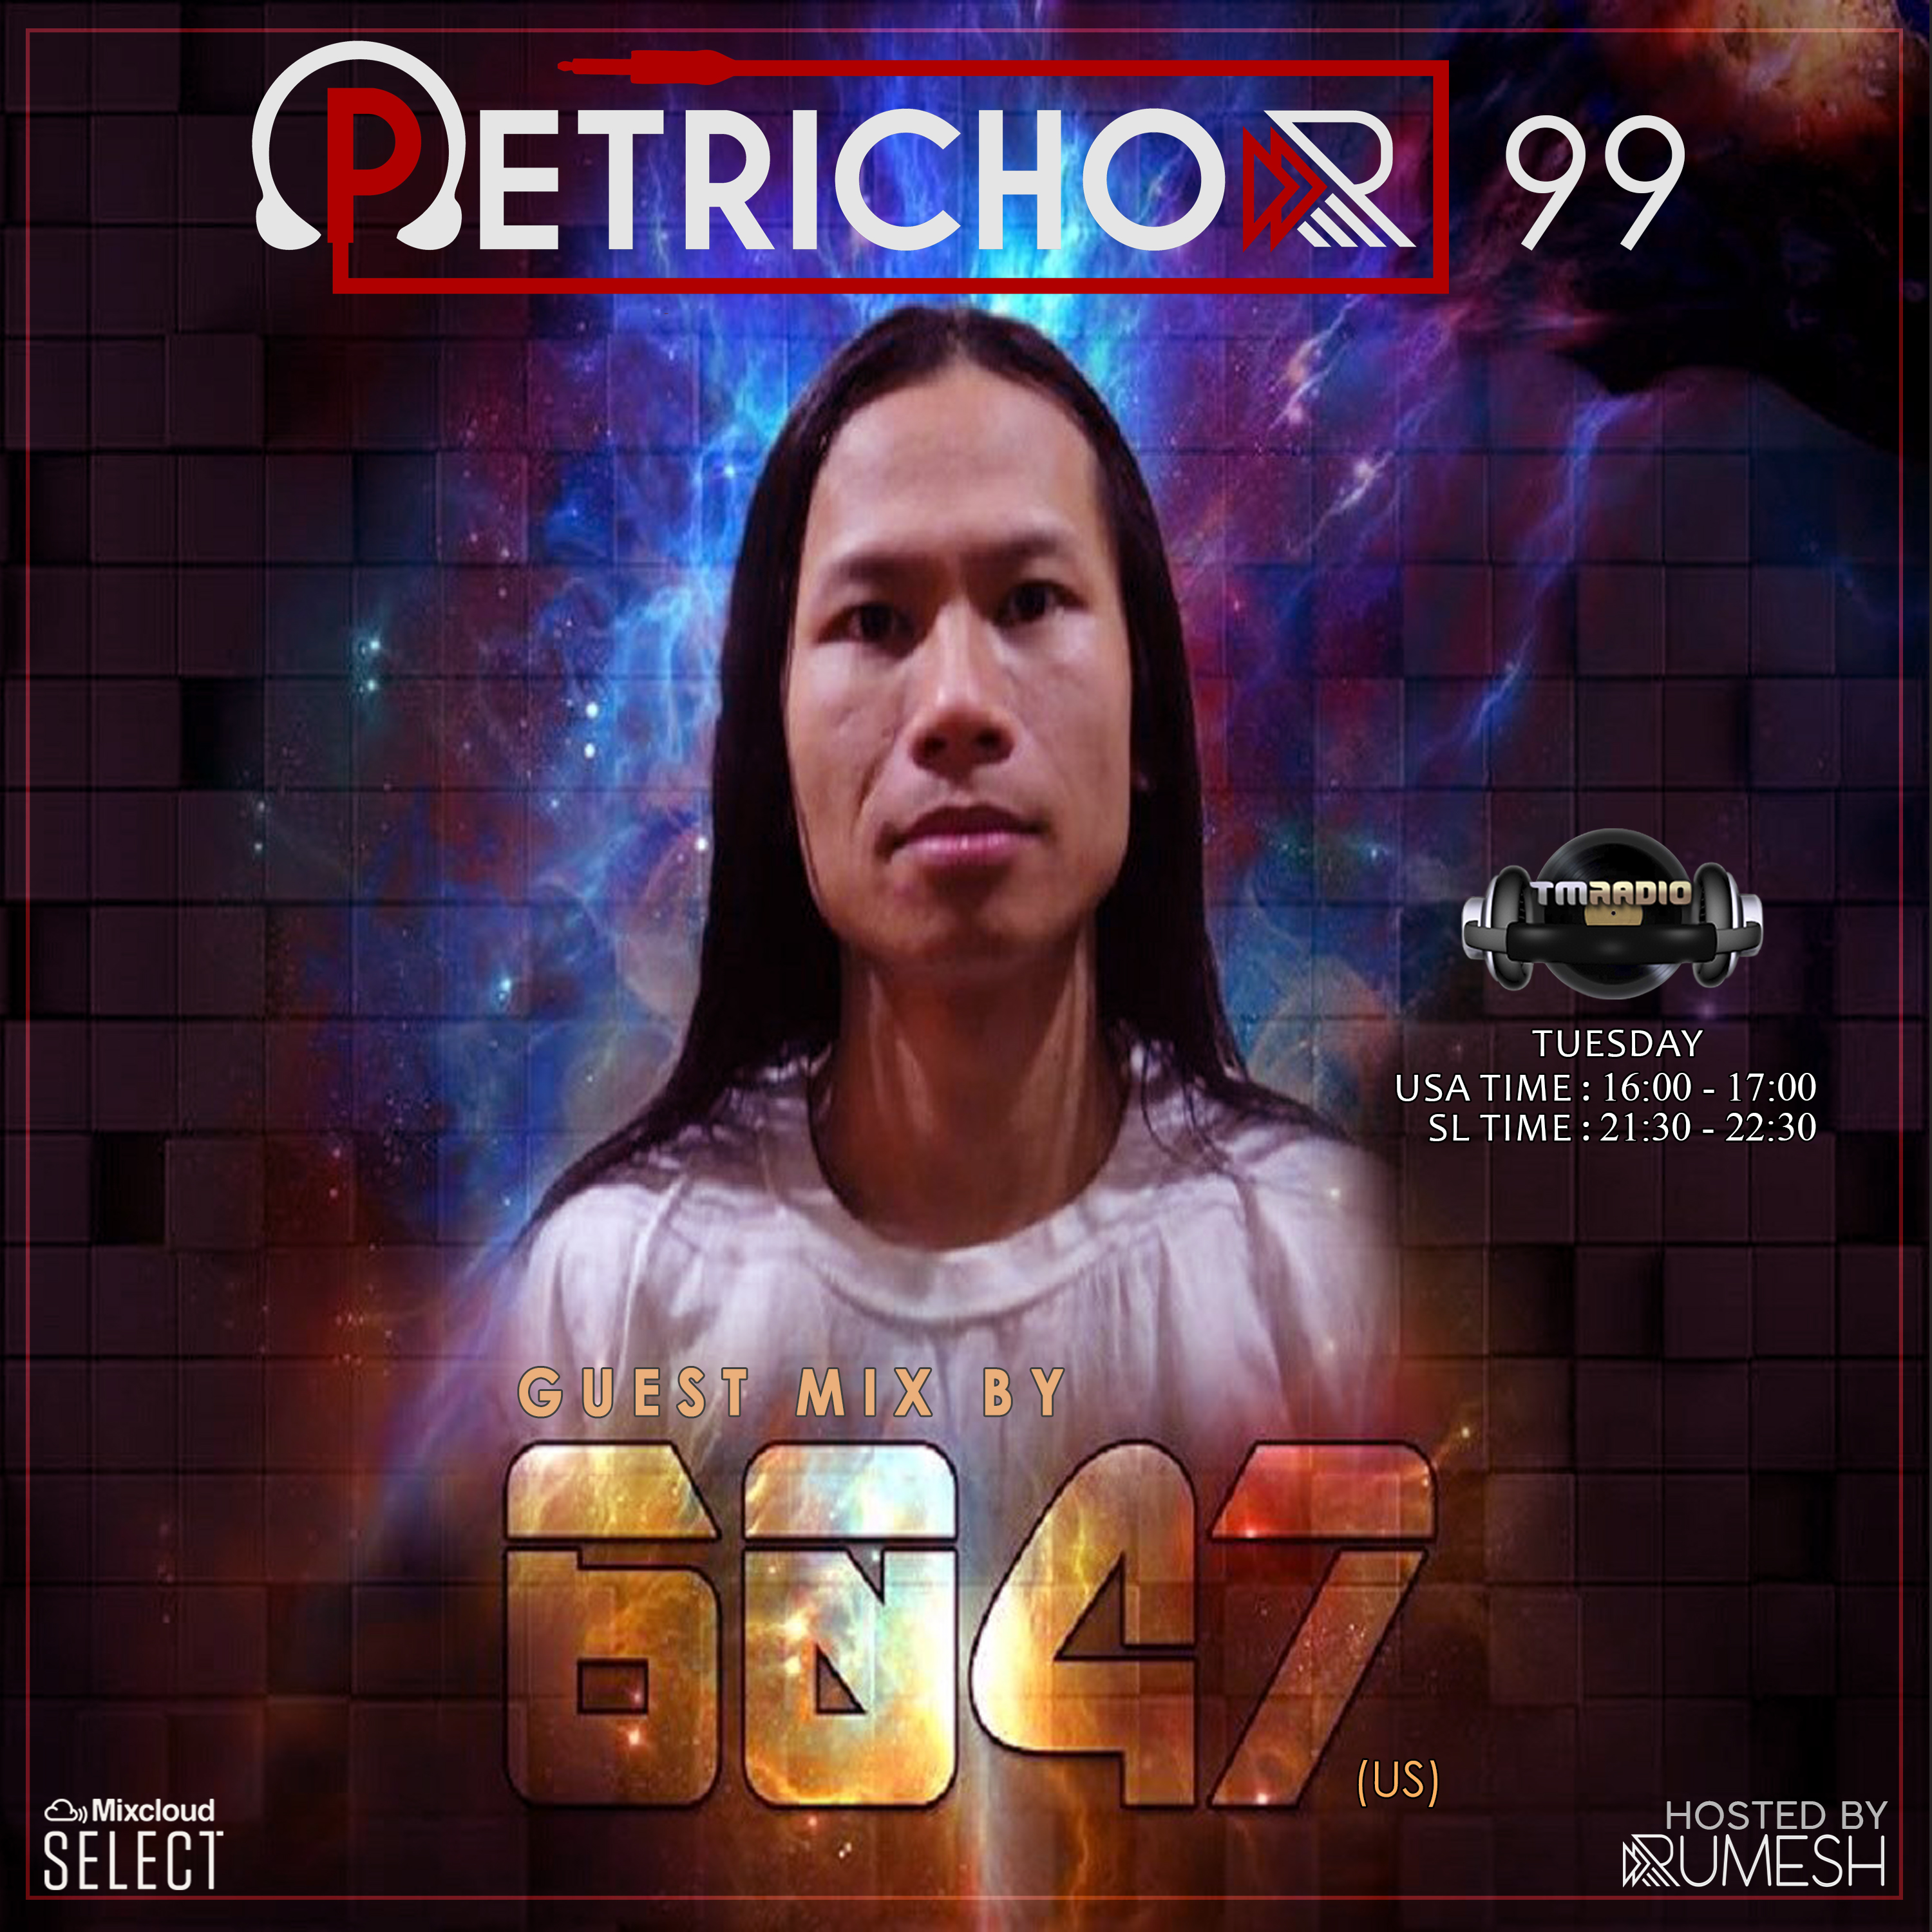 Petrichor 99 Guest Mix by 6047 (US) (from February 2nd, 2021)